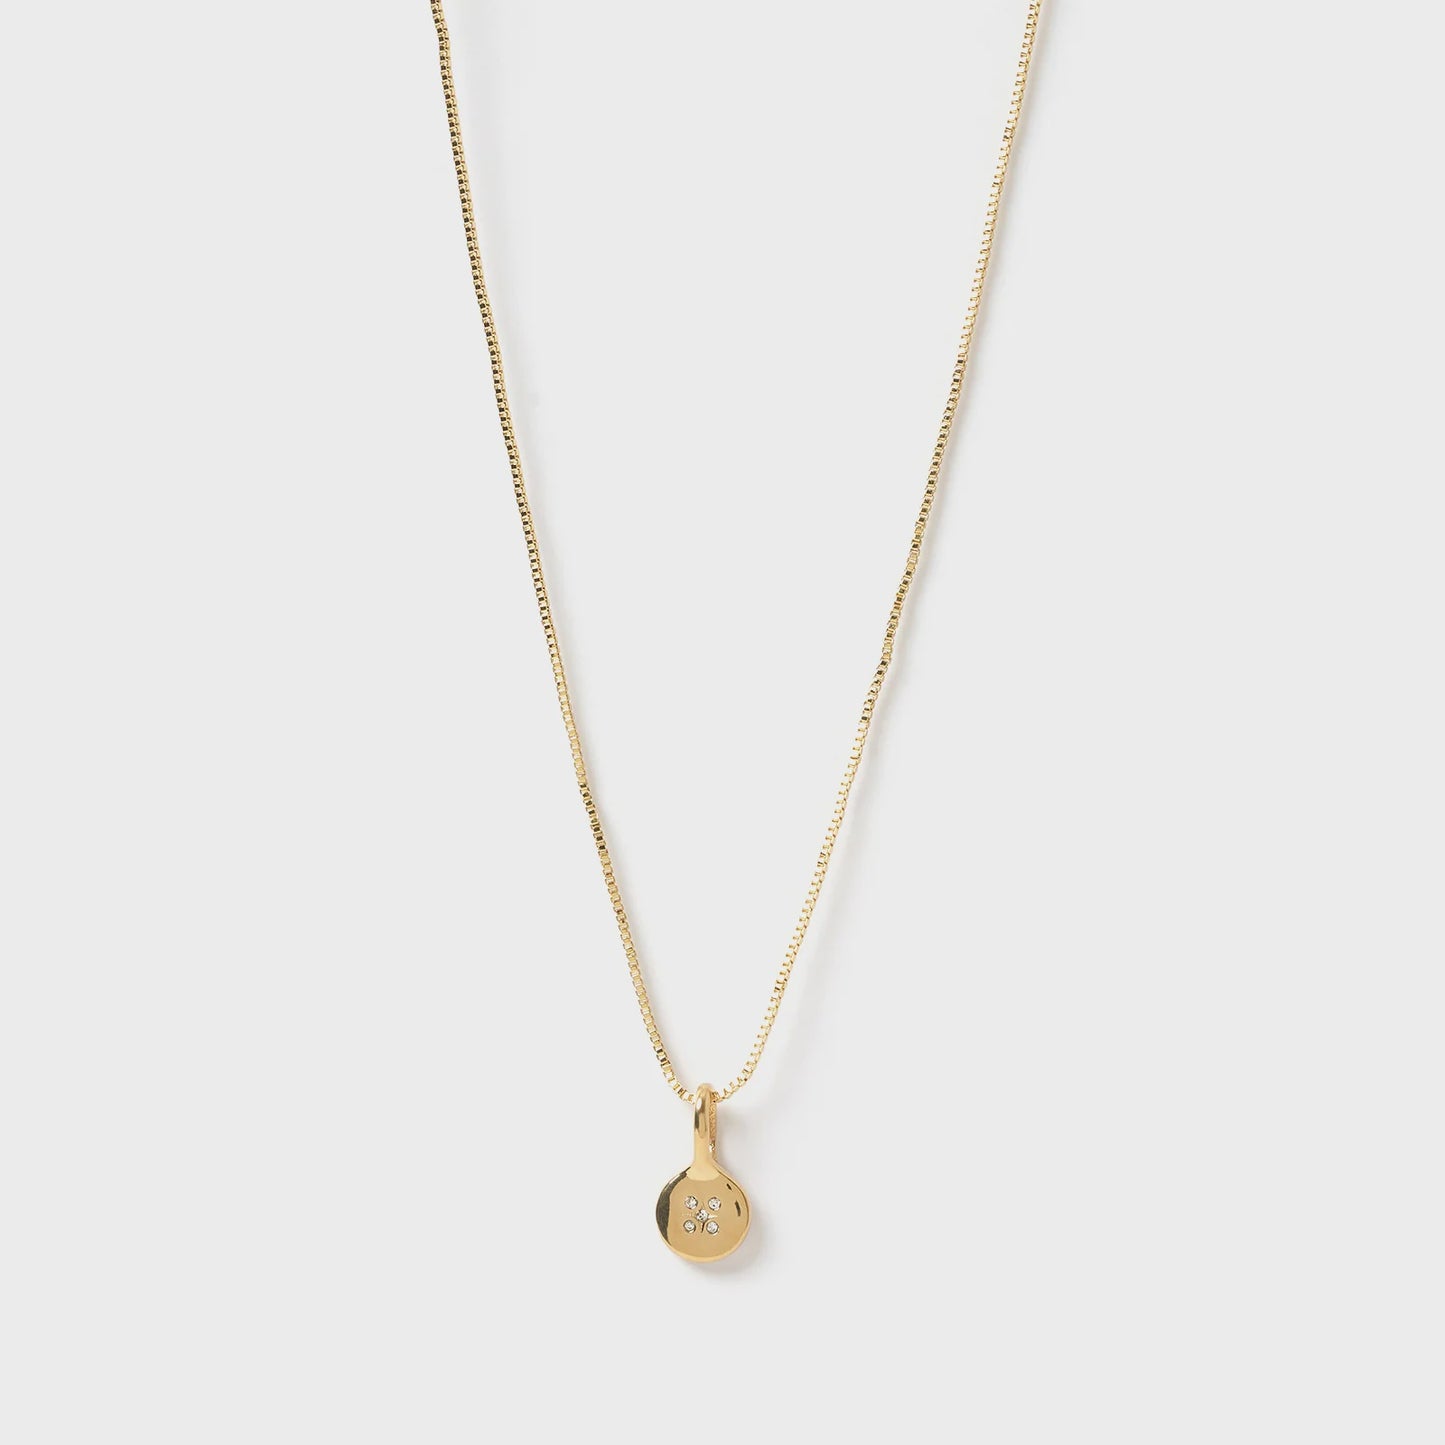 Angelo Gold Charm Necklace - Small